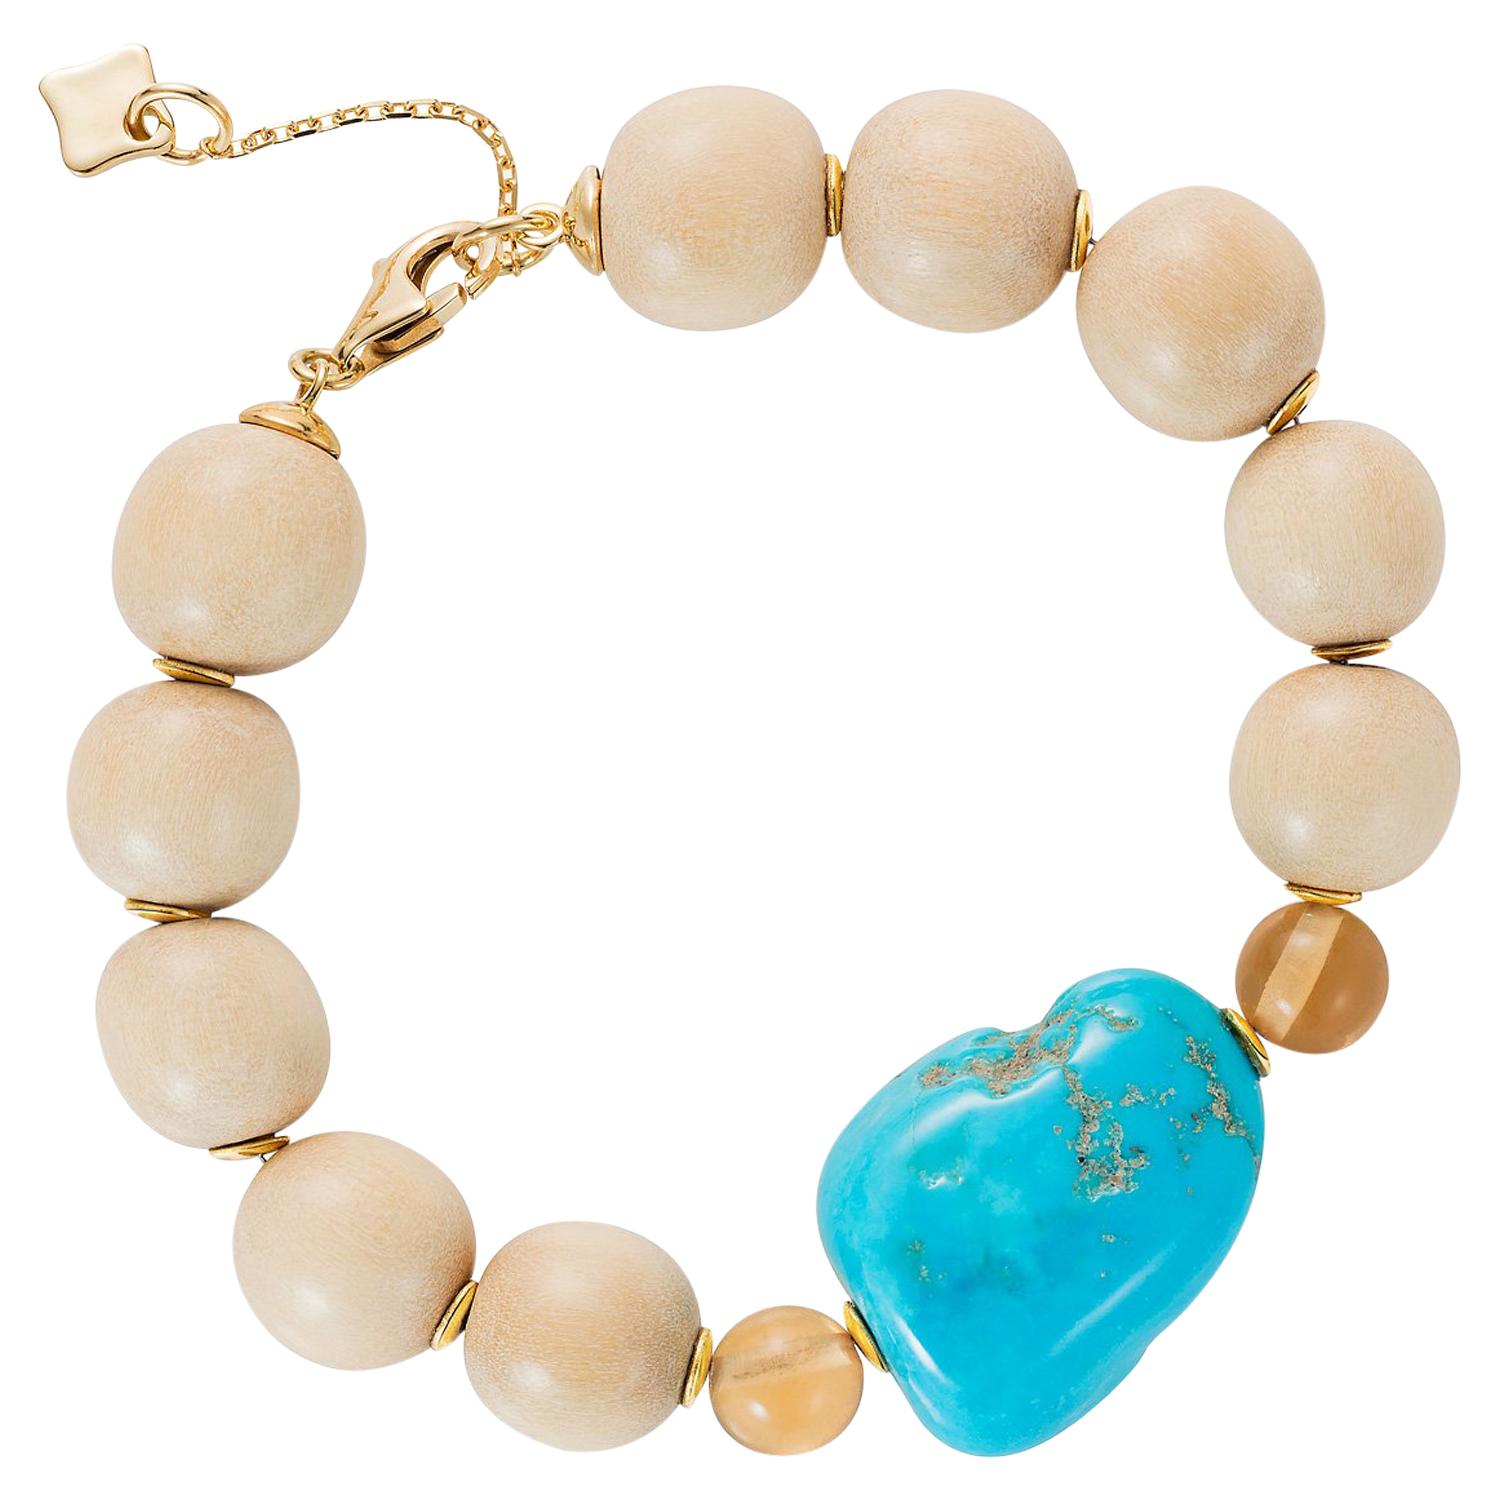  Modern Wooden Bead bracelet with 18k gold discs, Tumbled Turquoise, Champagne For Sale